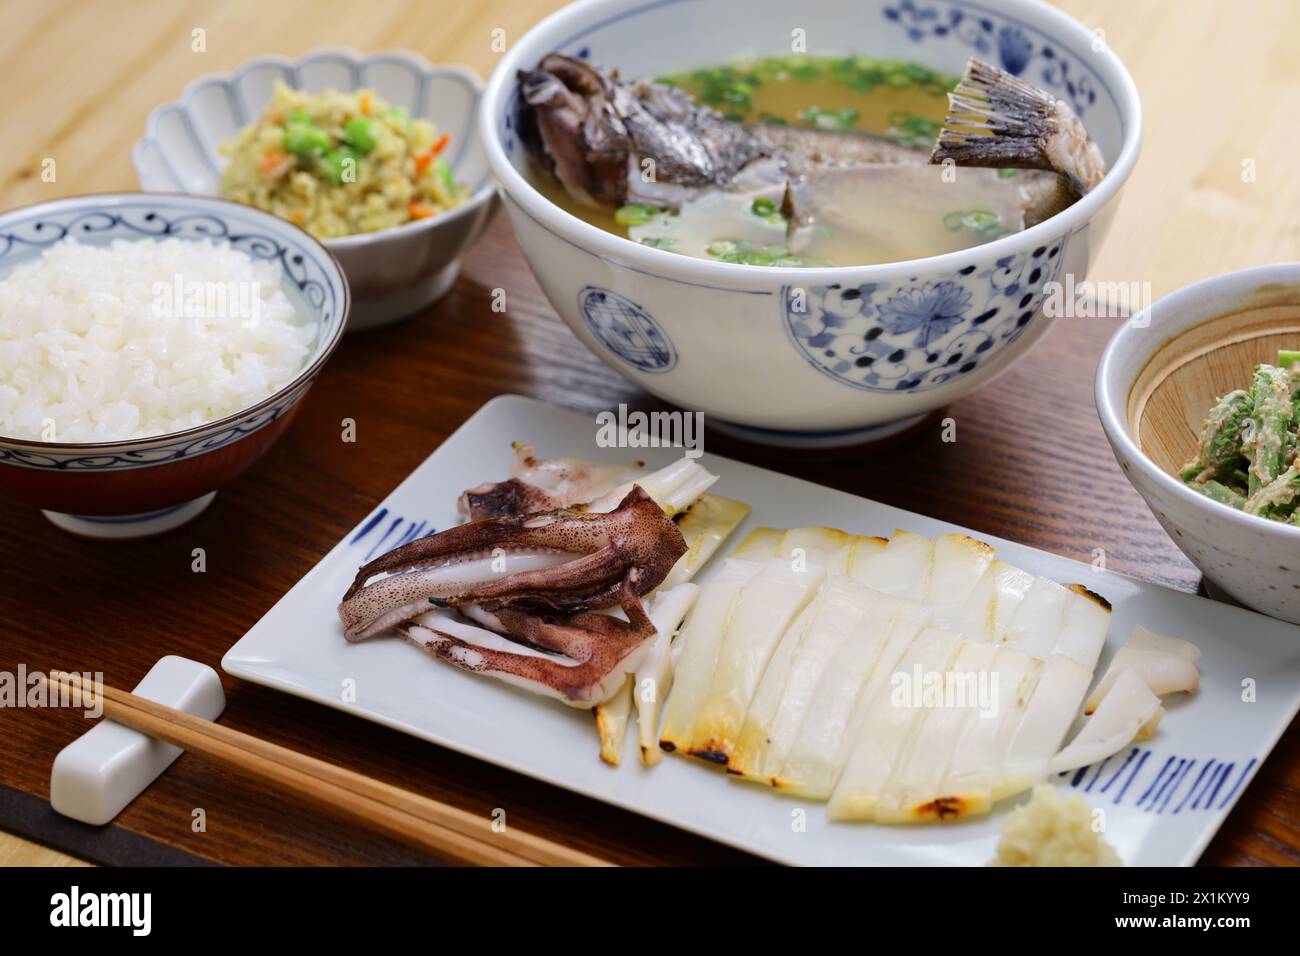 Japanese one soup and three side dishes seafood set meal Stock Photo